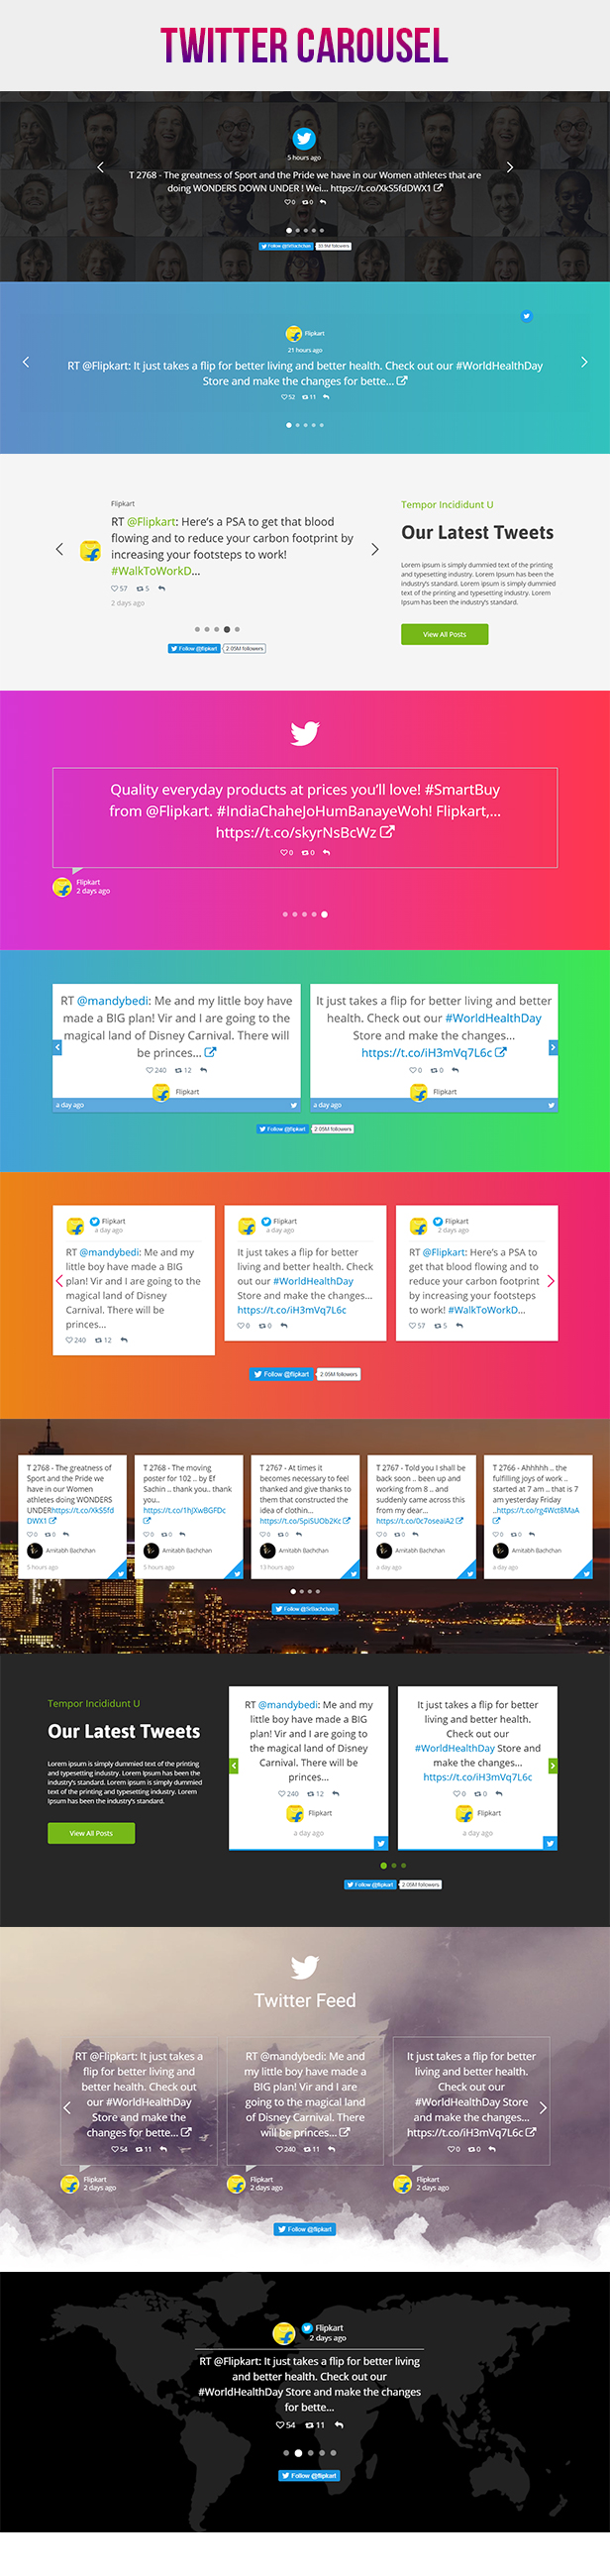 Visual Composer - Twitter Feed Stream Grid With Carousel